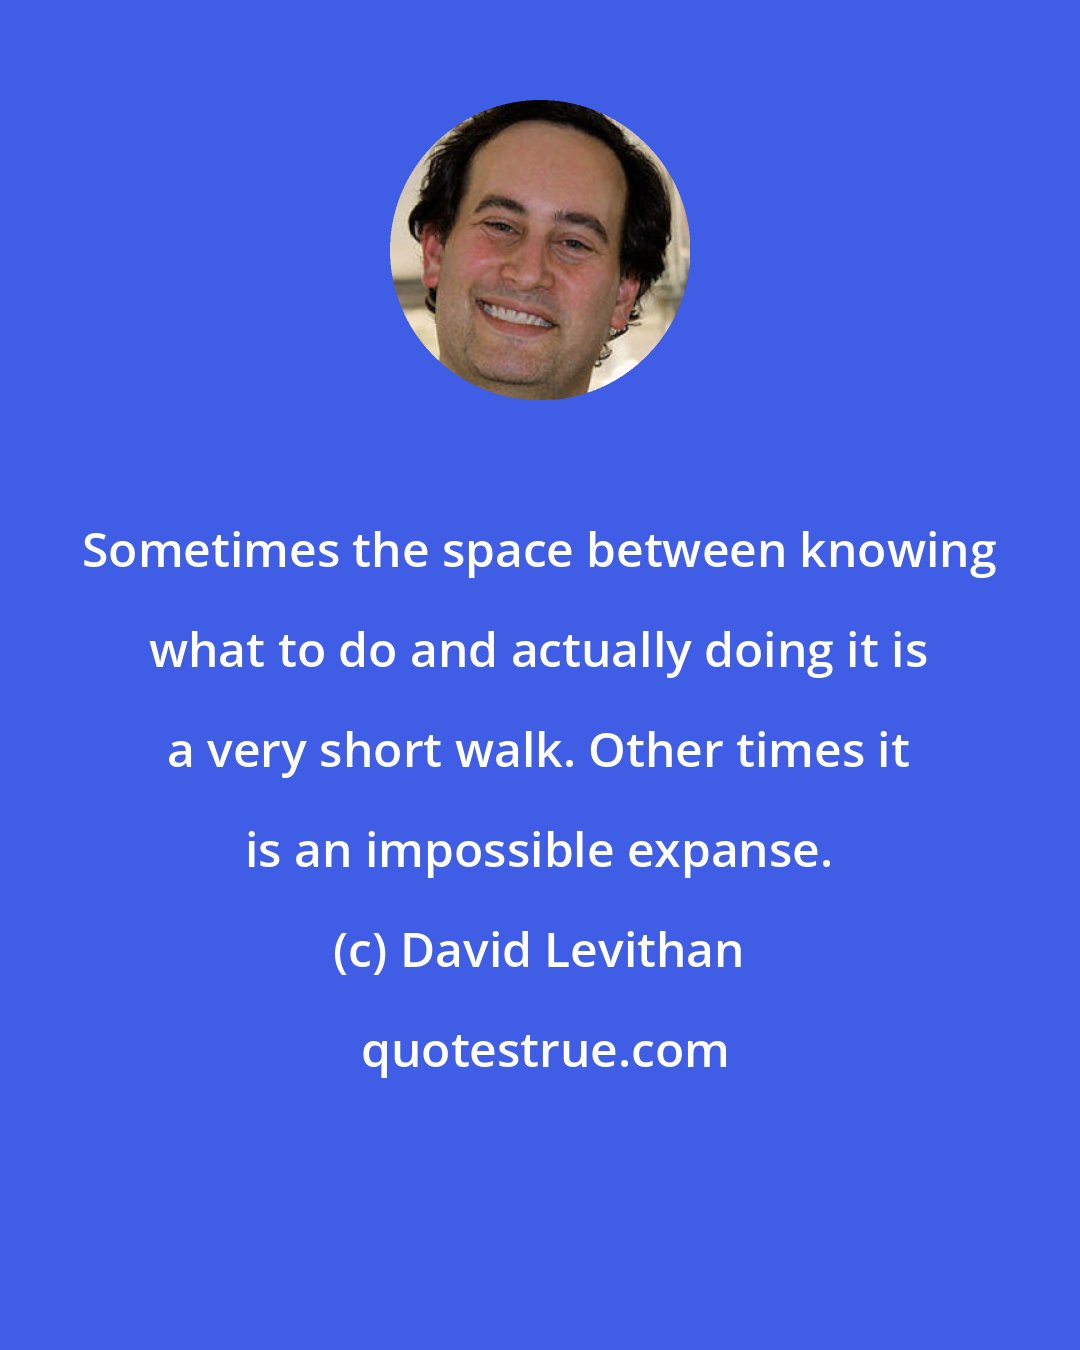 David Levithan: Sometimes the space between knowing what to do and actually doing it is a very short walk. Other times it is an impossible expanse.